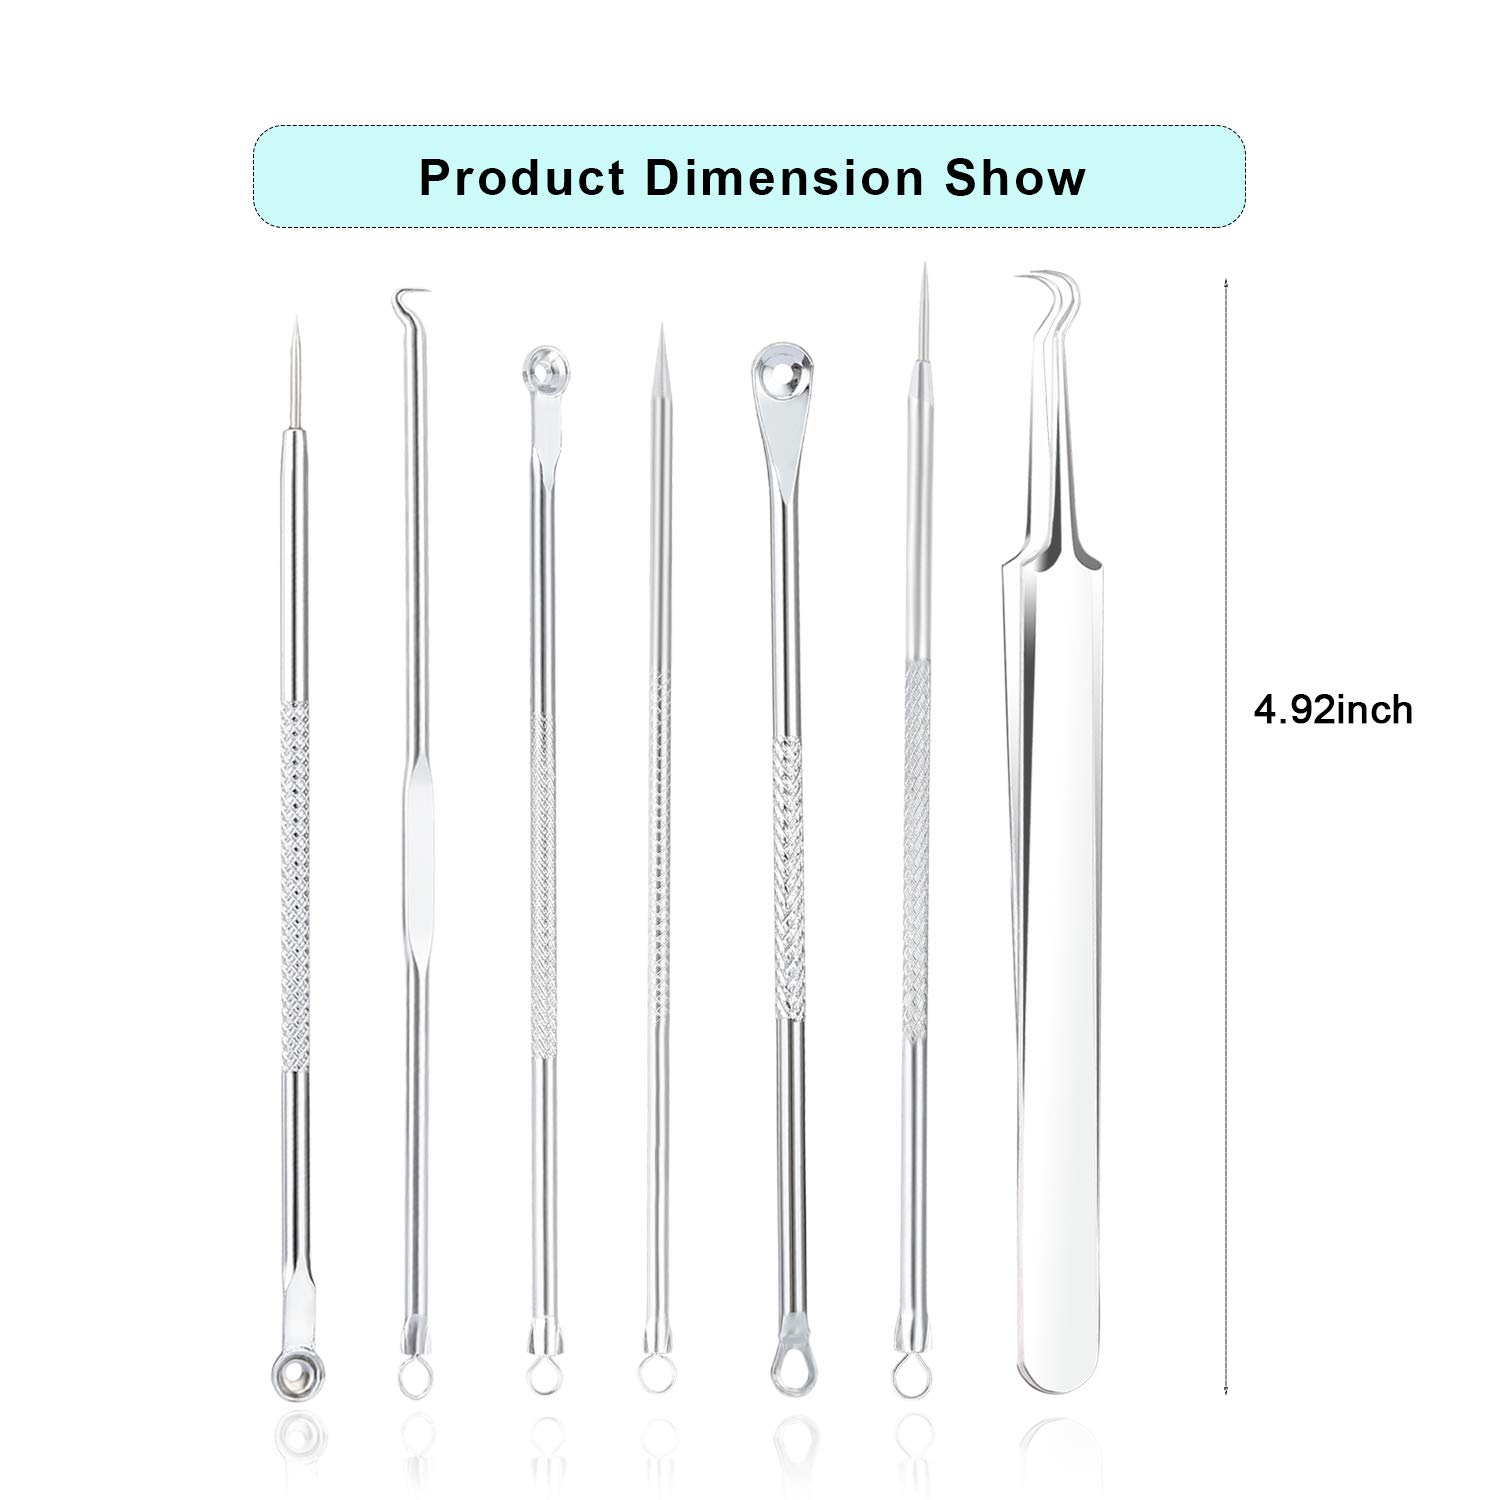 7PCS Blackhead Remover, Blackheads Extraction Removal Tool, Blemish Acne Pimple Extractor, Stainless Steel Removing Kit, Nose Face Clean Tools by OMDEAL